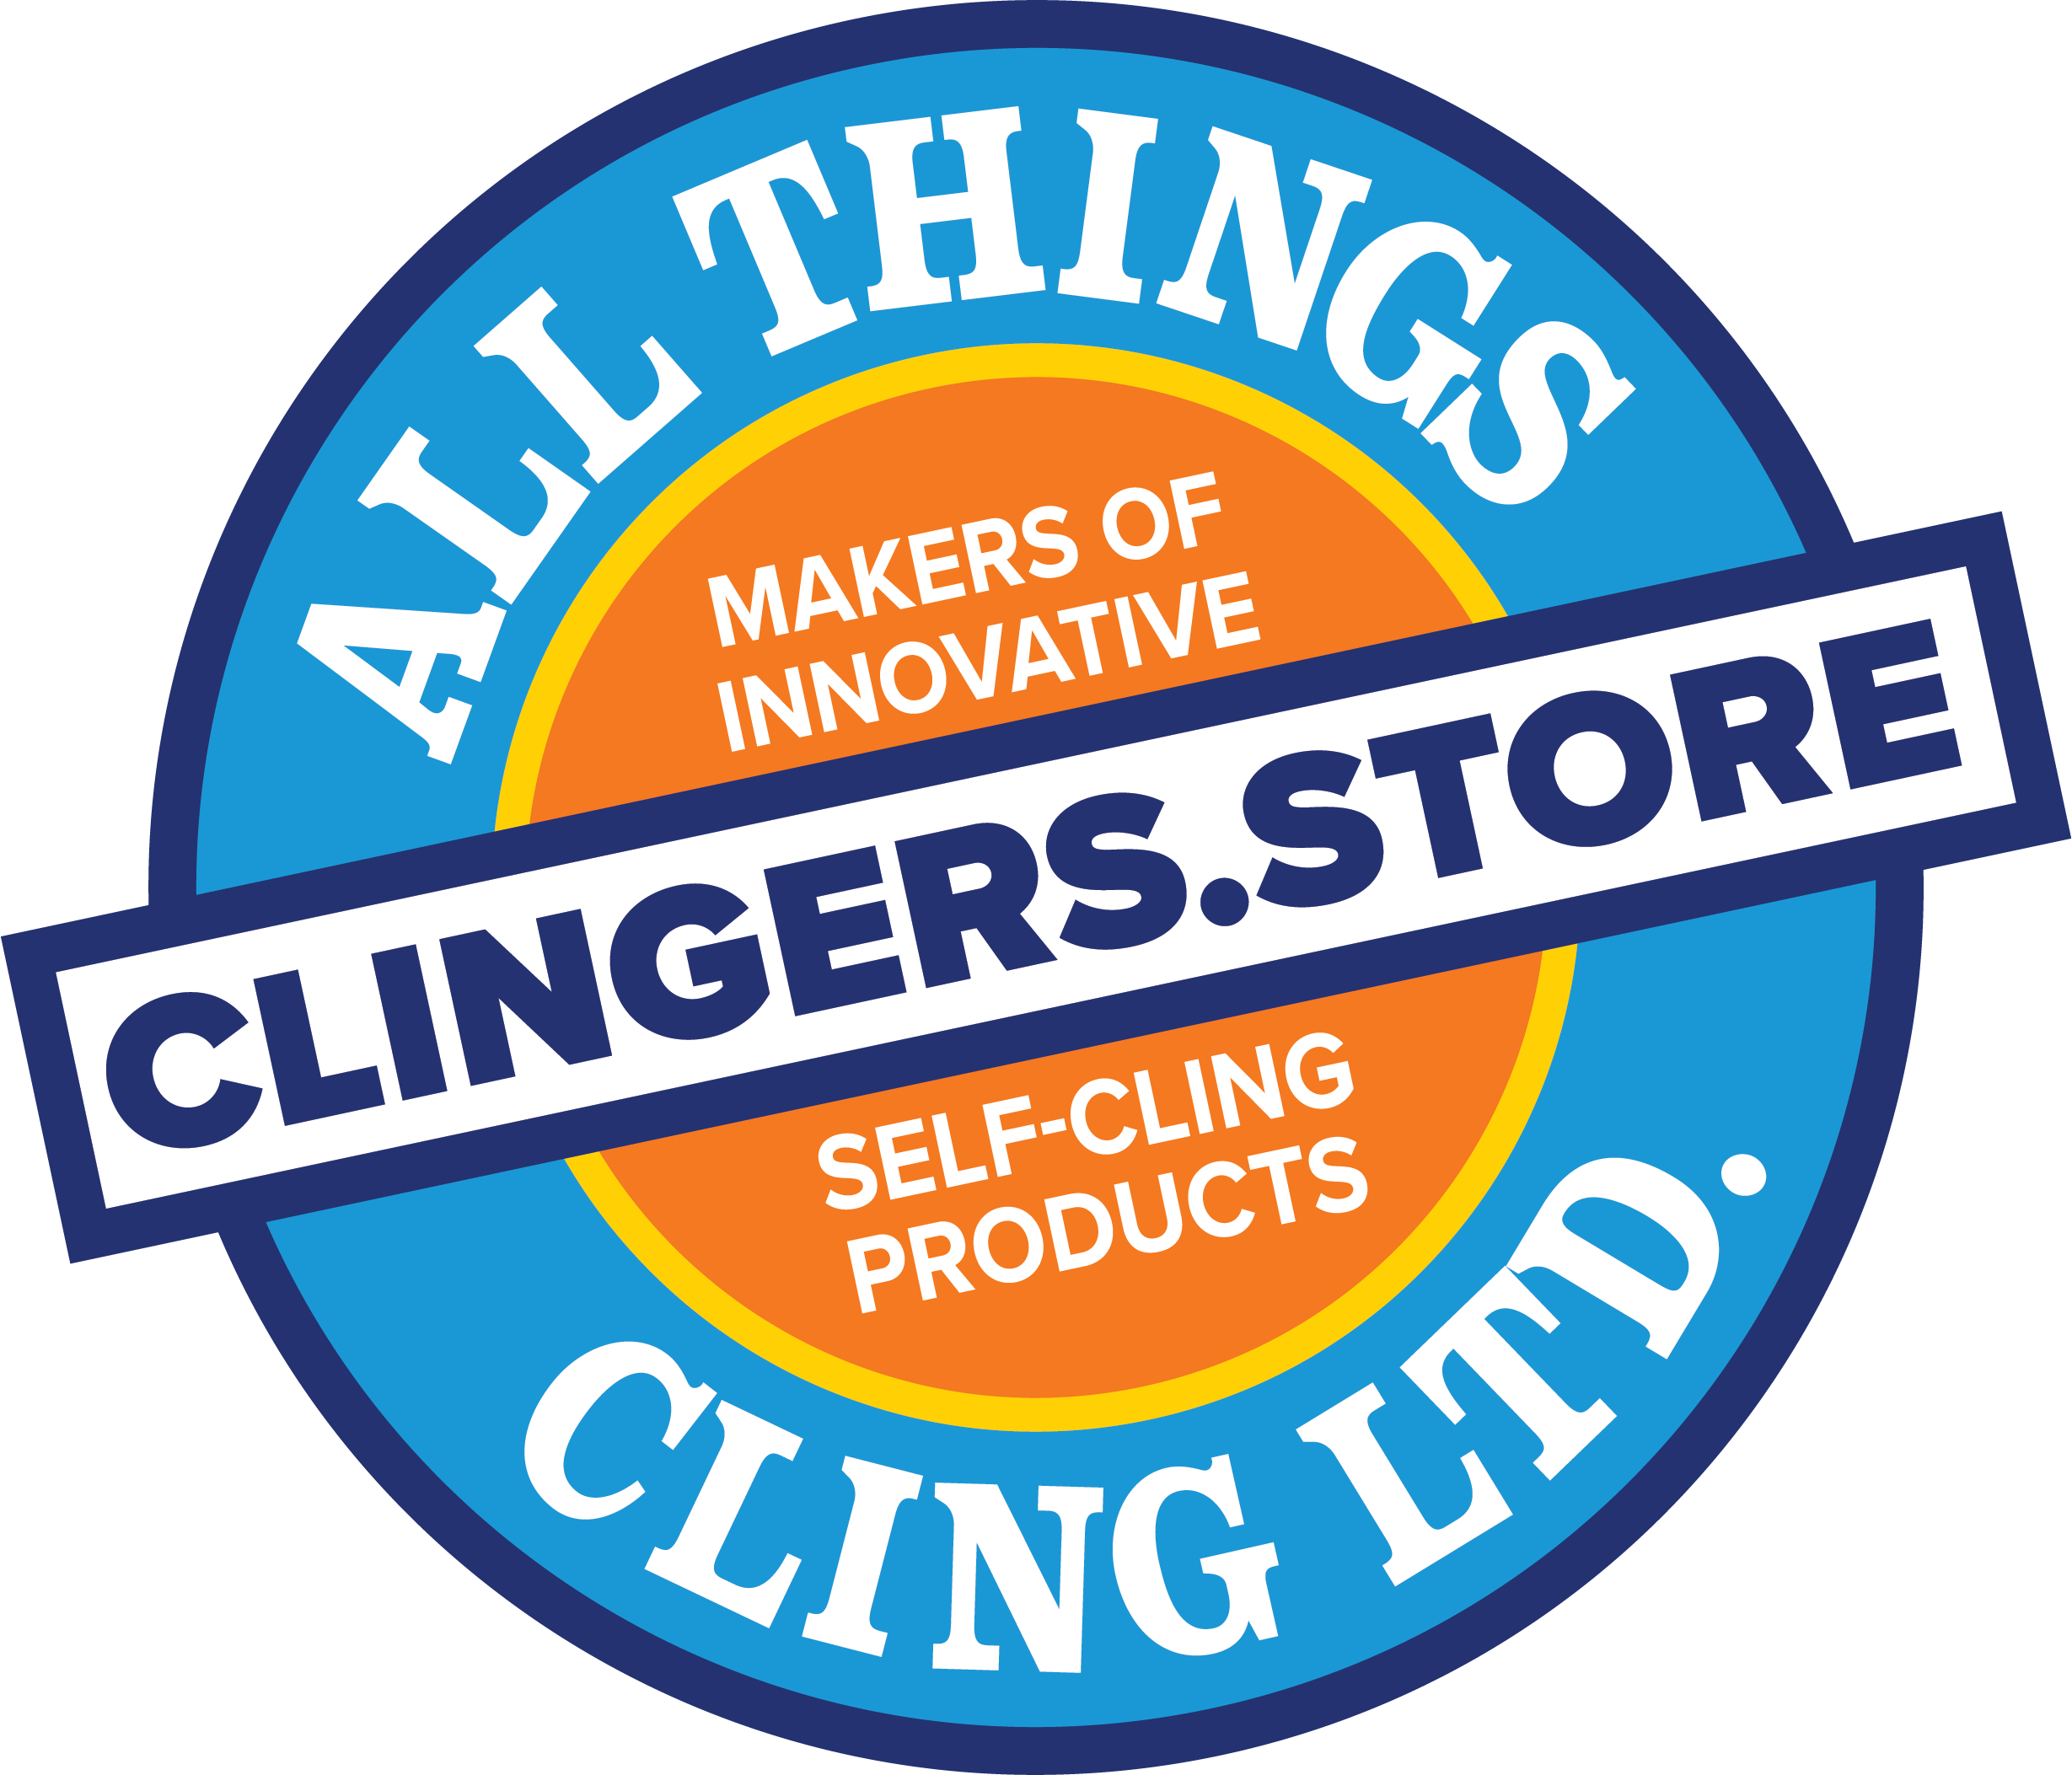 The Backpacker - Cling-rite® Roll – clingers-shop